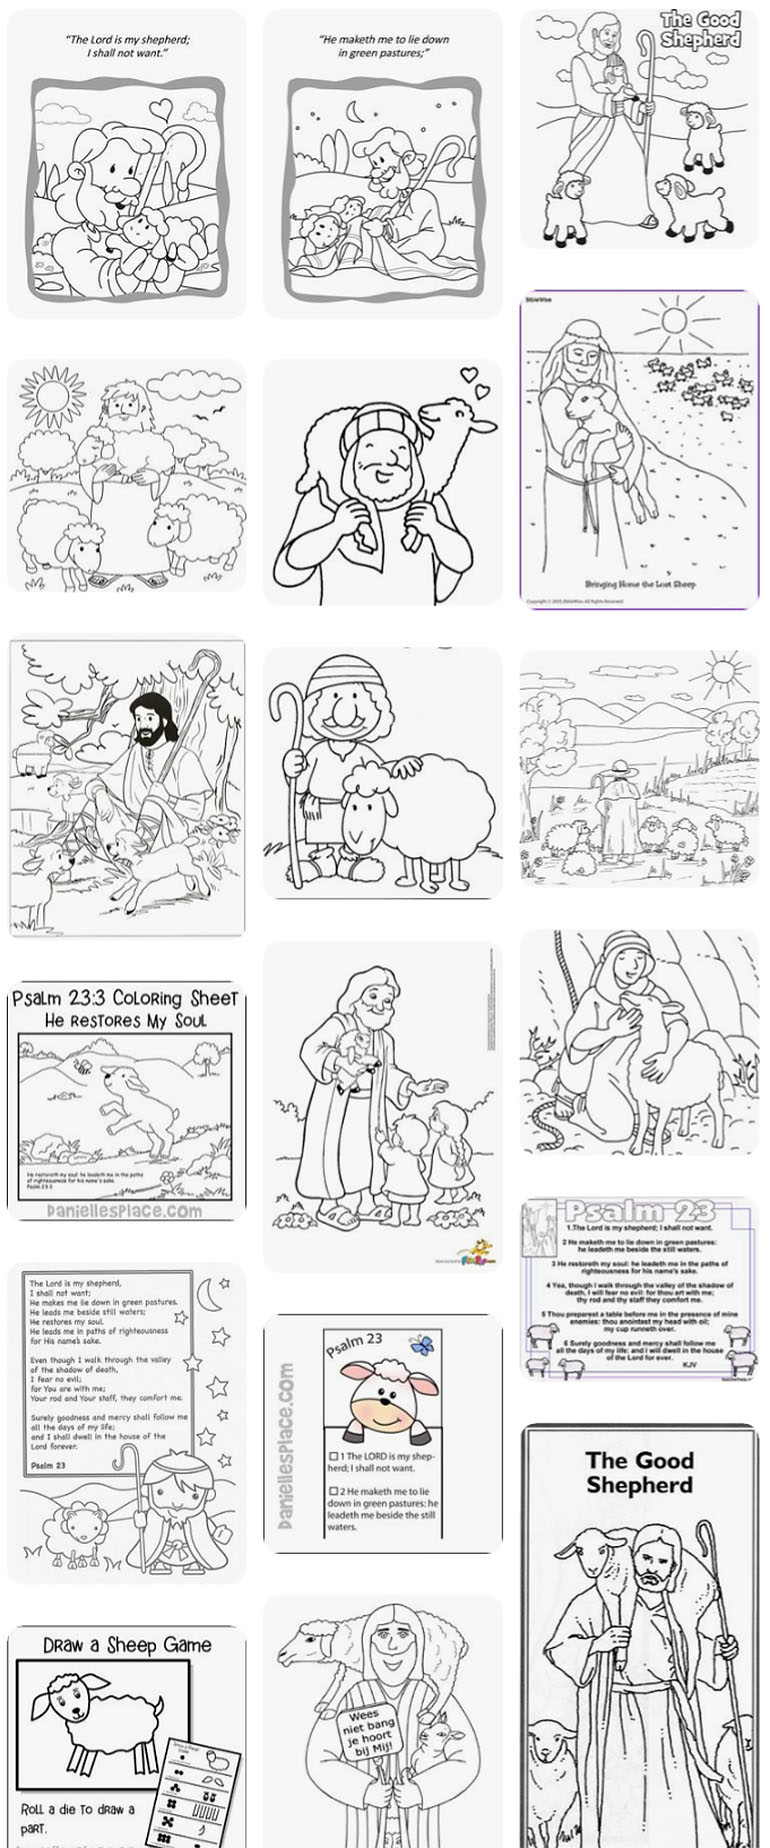 shepherd staff coloring page